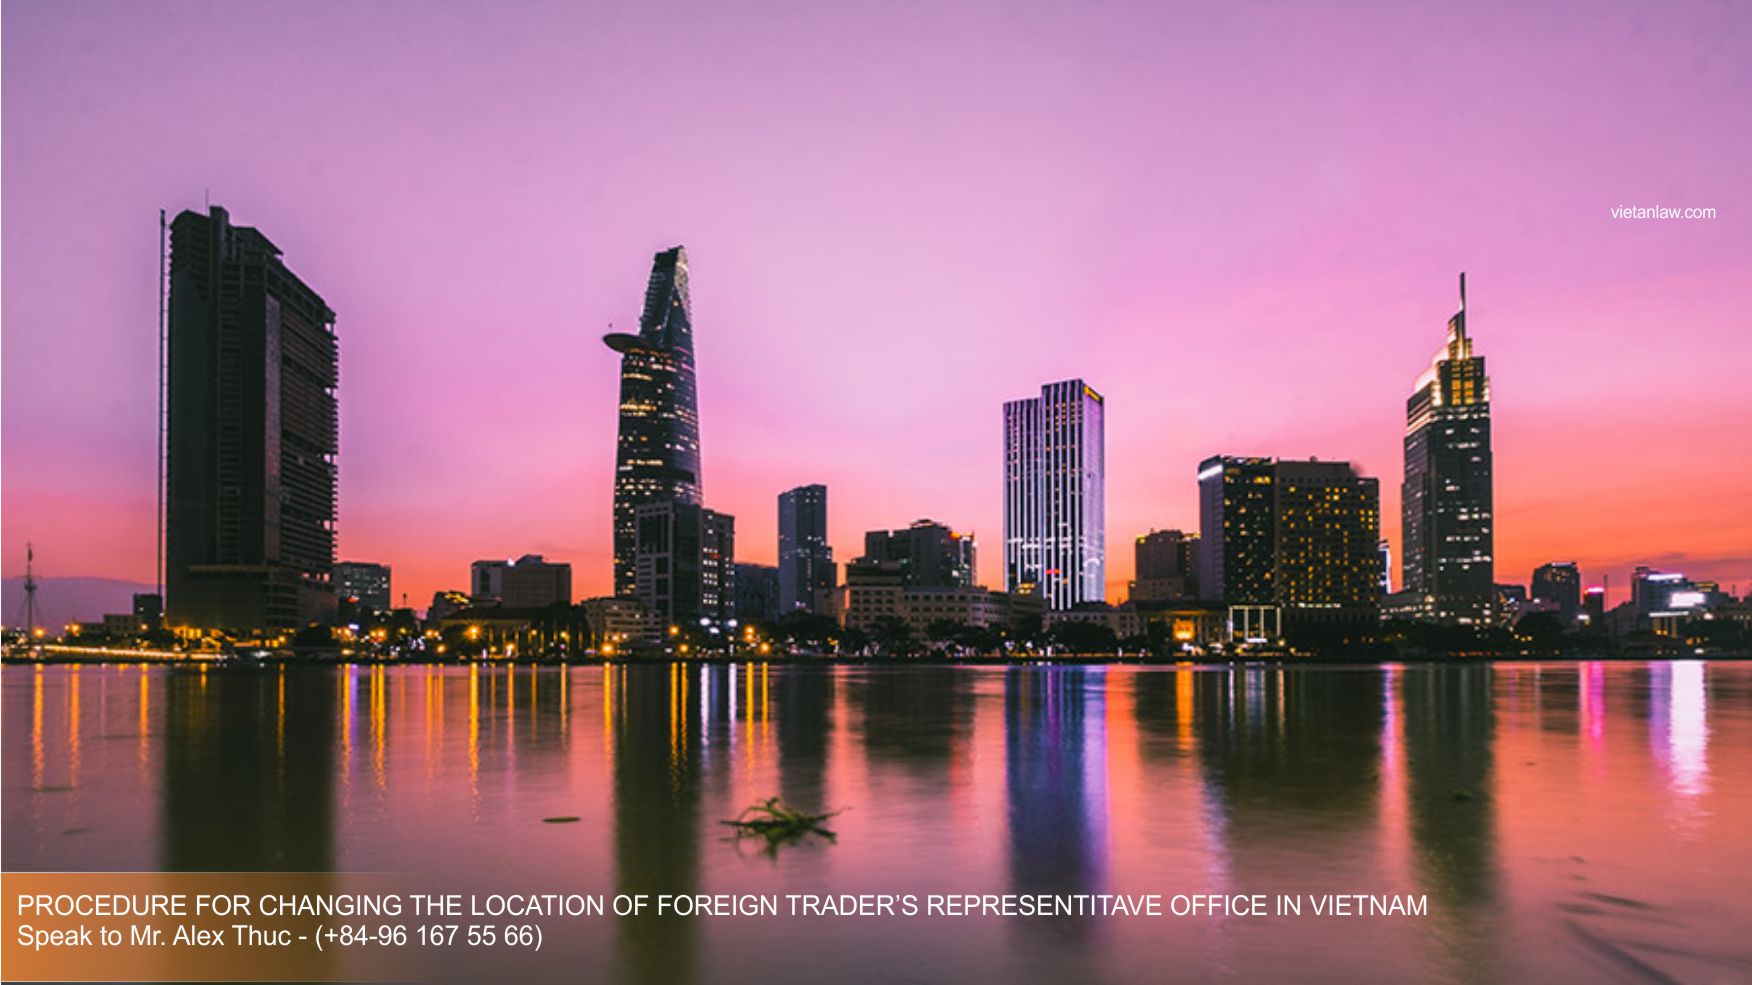 Procedure for changing the location of foreign trader’s representitave office in Vietnam